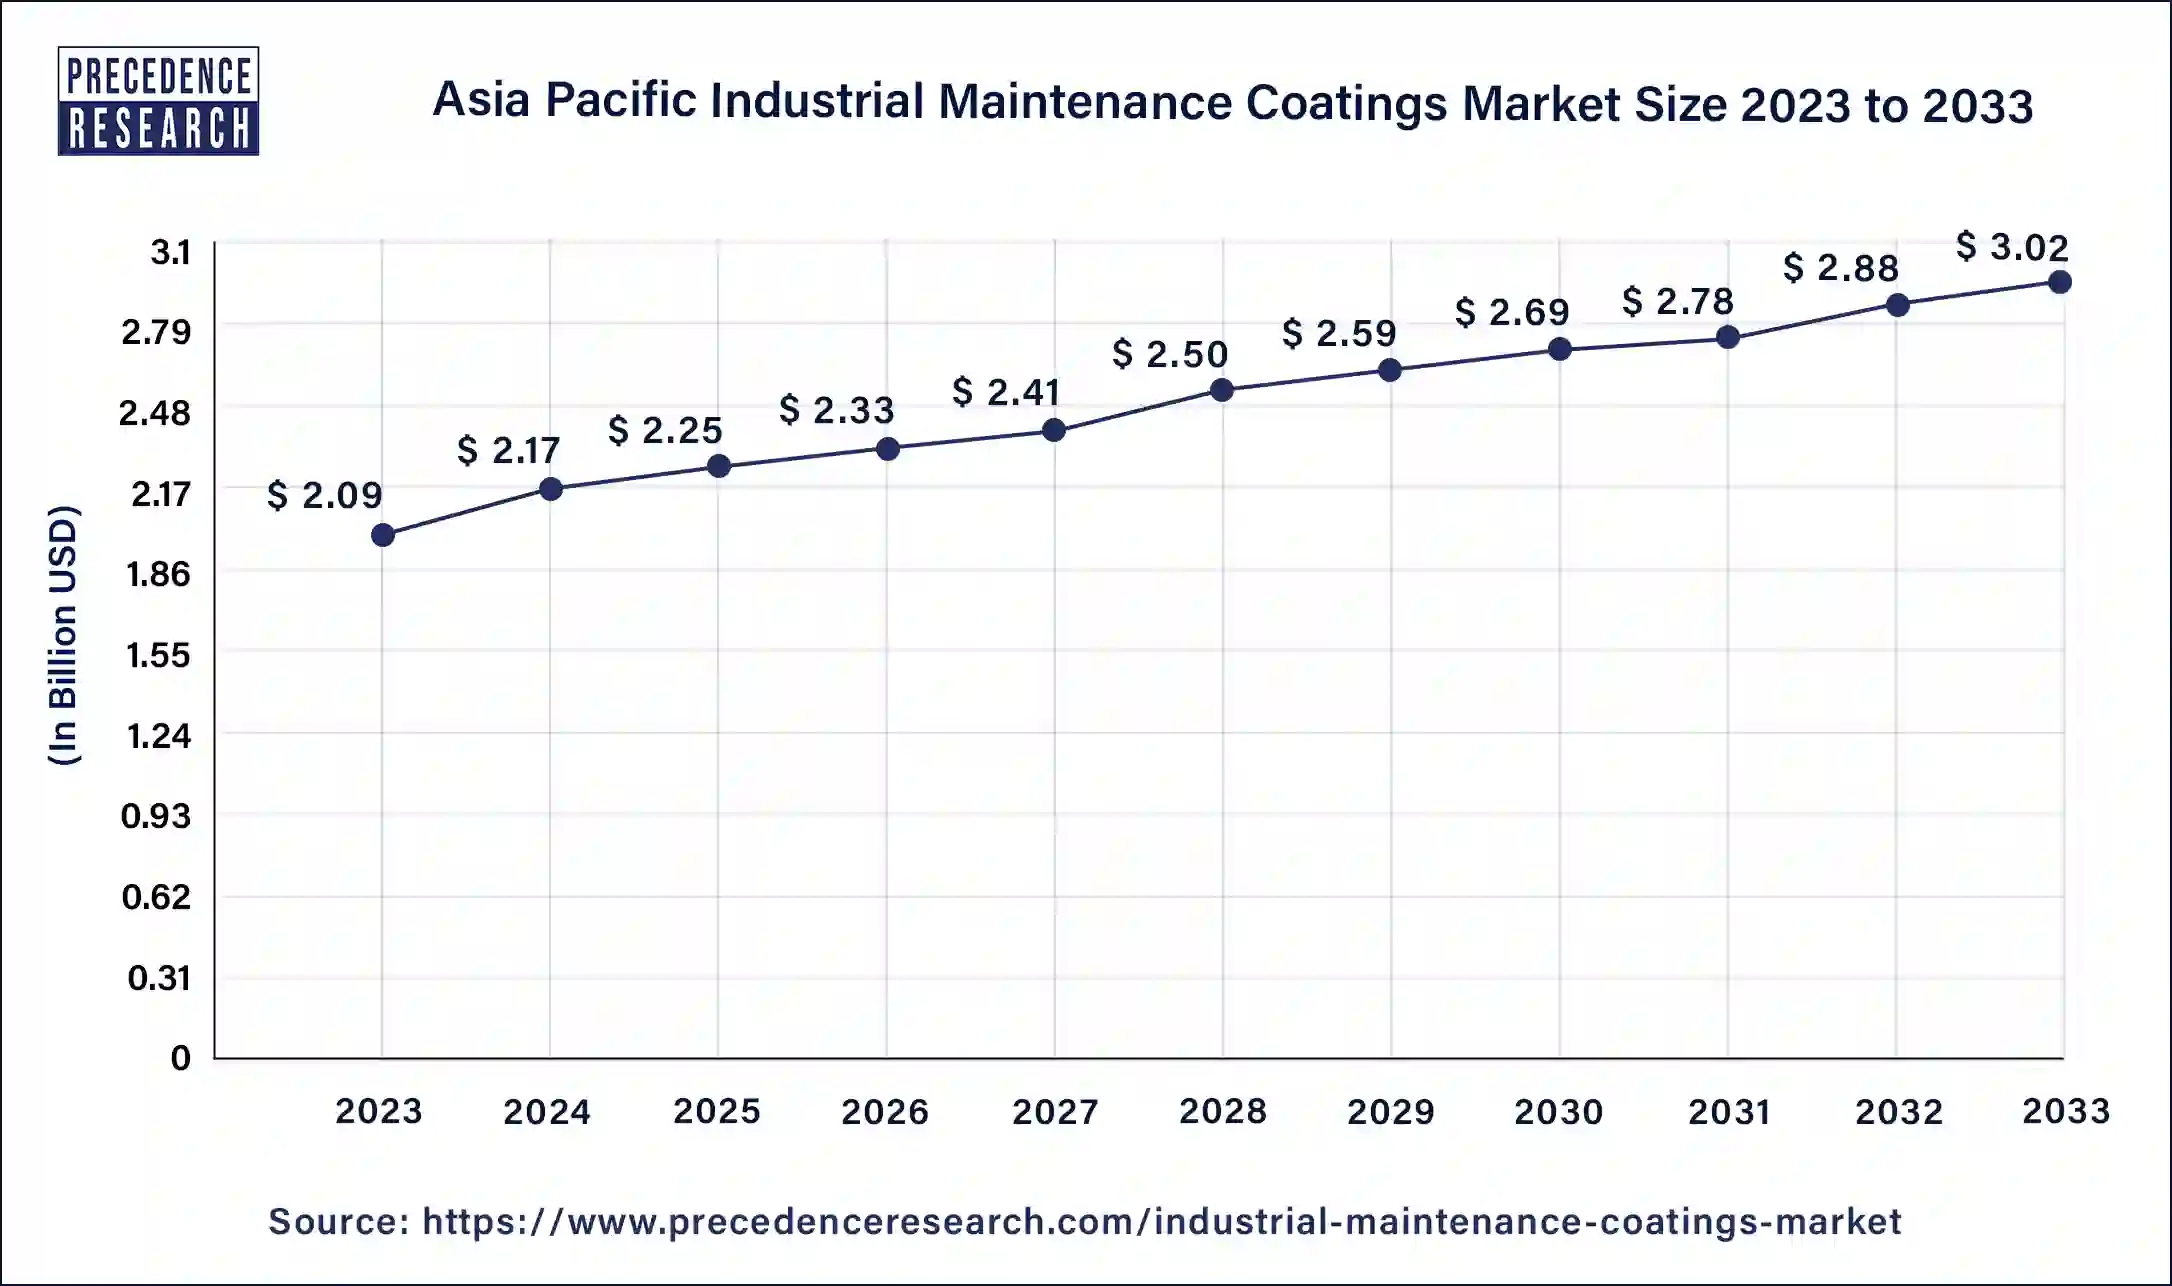 Asia Pacific Industrial Maintenance Coatings Market Size 2024 to 2033